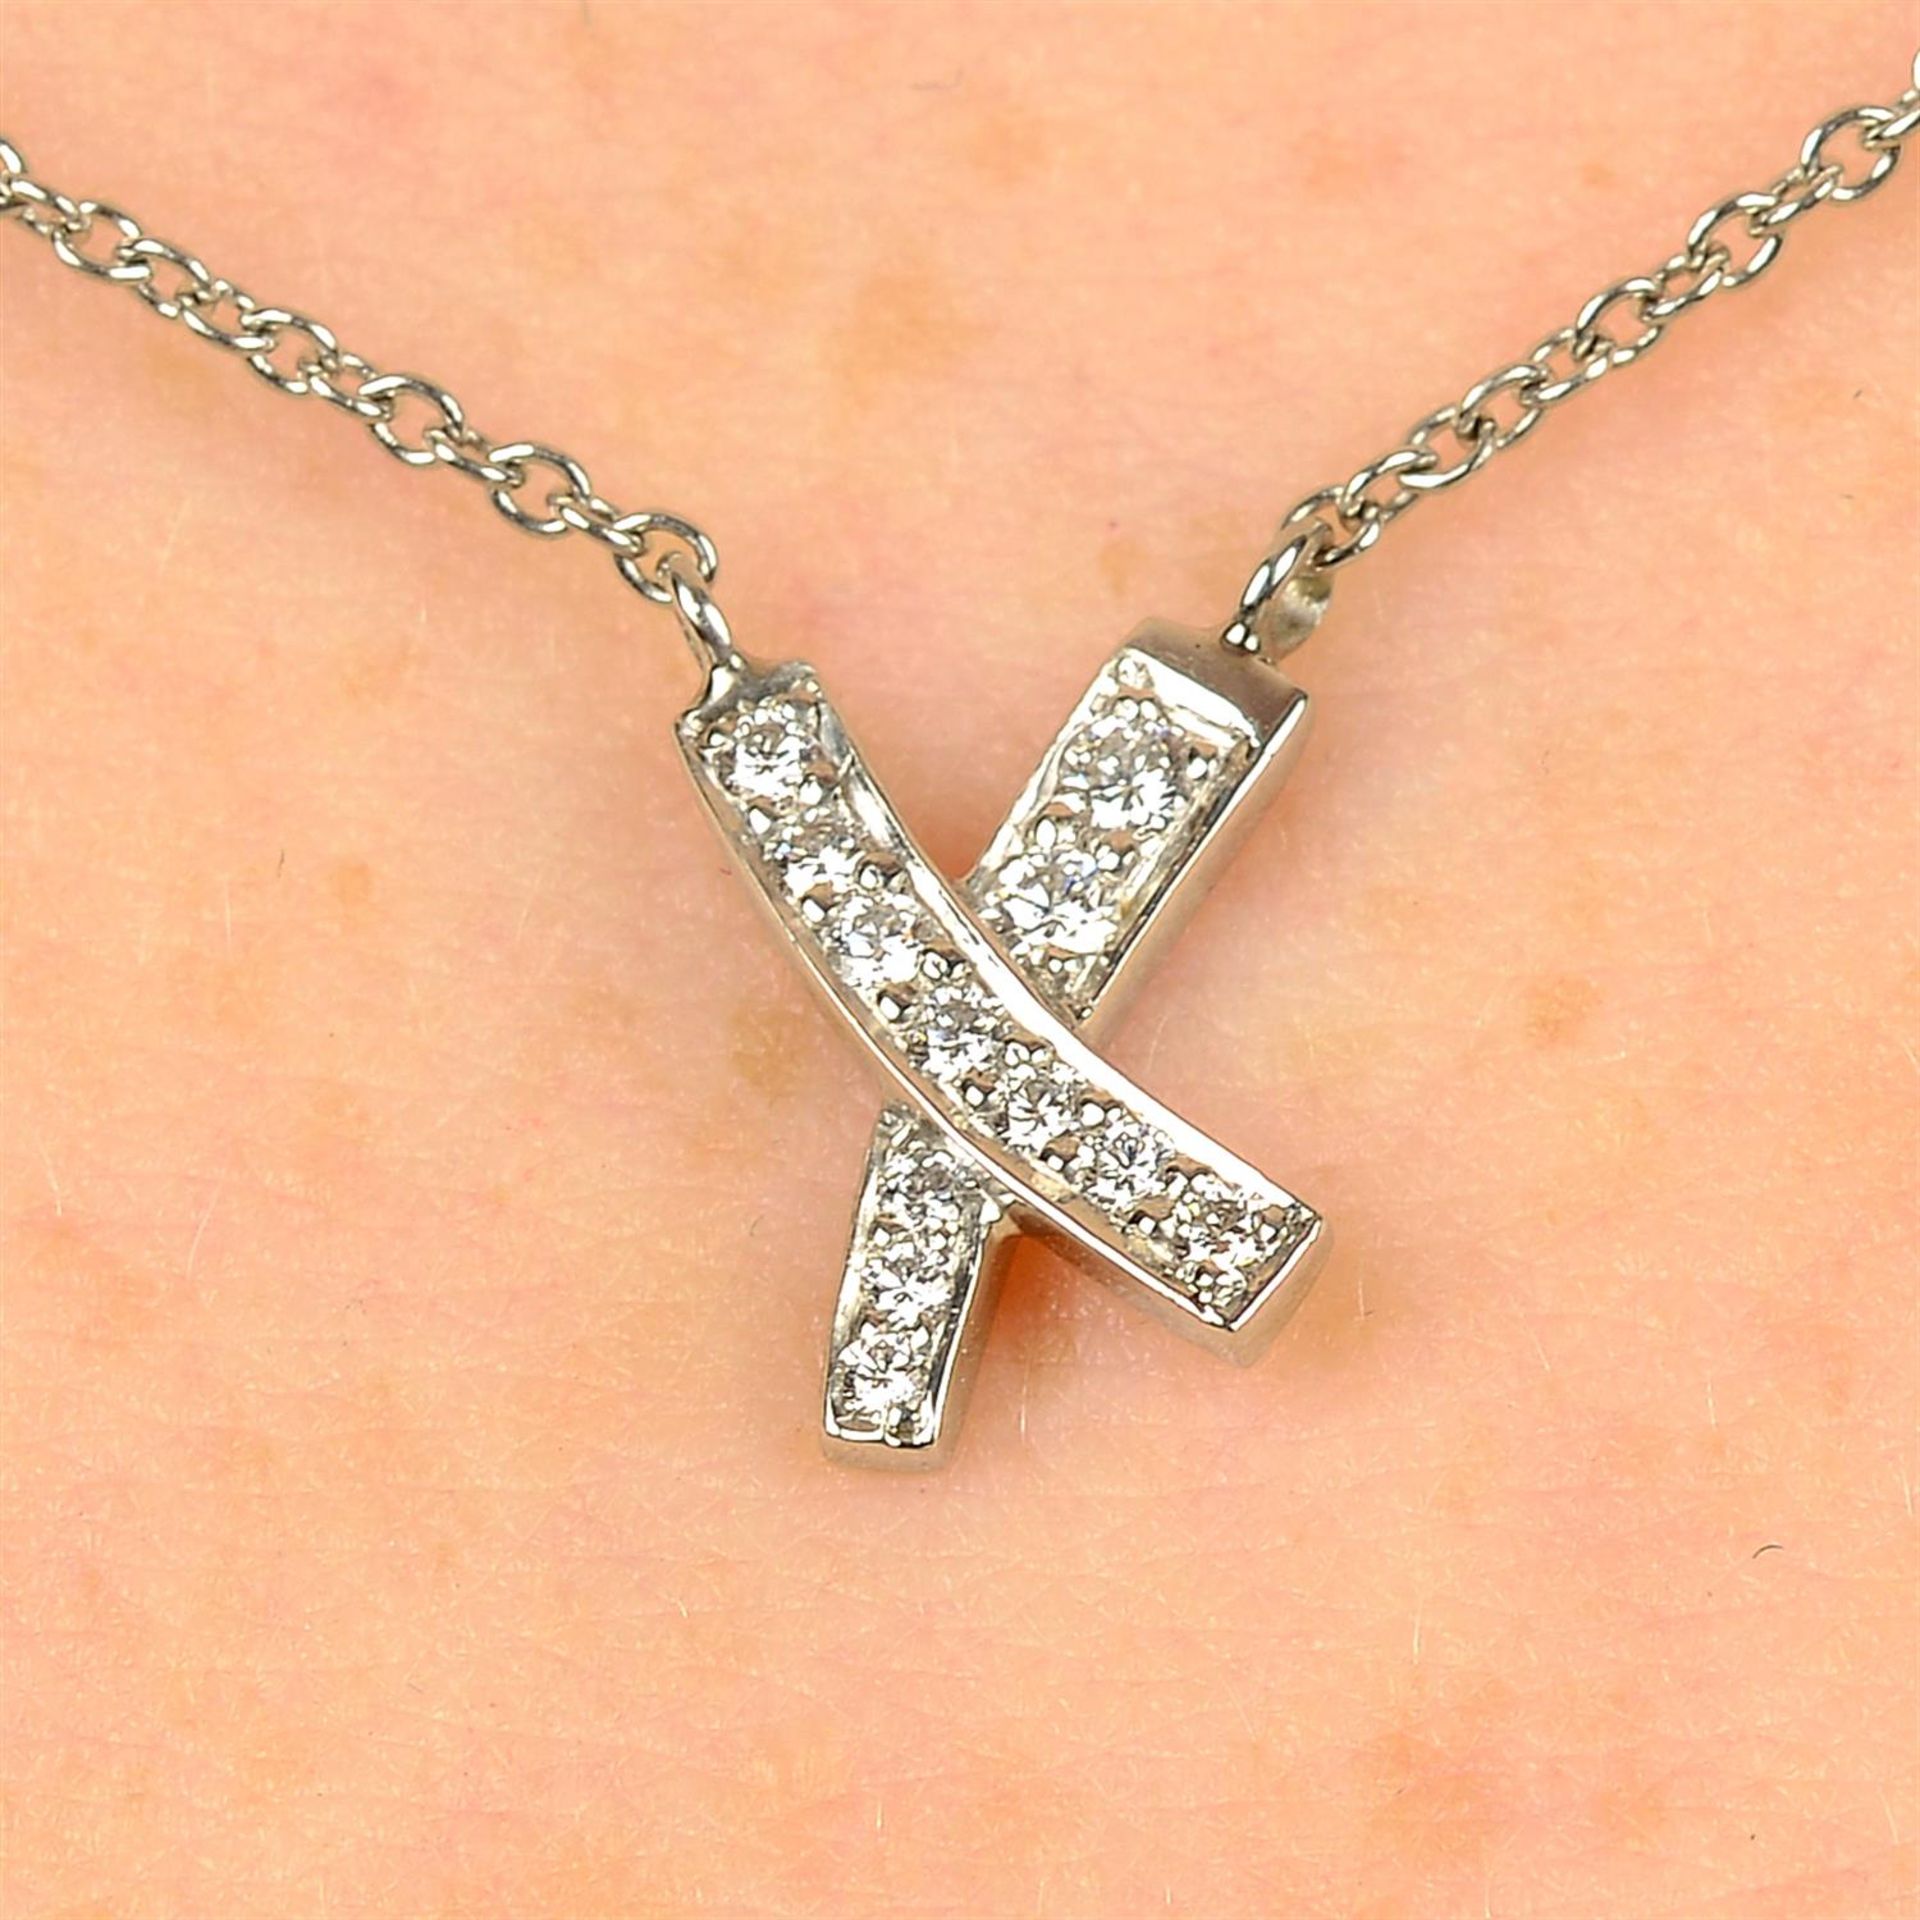 A diamond 'Kiss' cross pendant, on chain, by Paloma Picasso for Tiffany & Co.